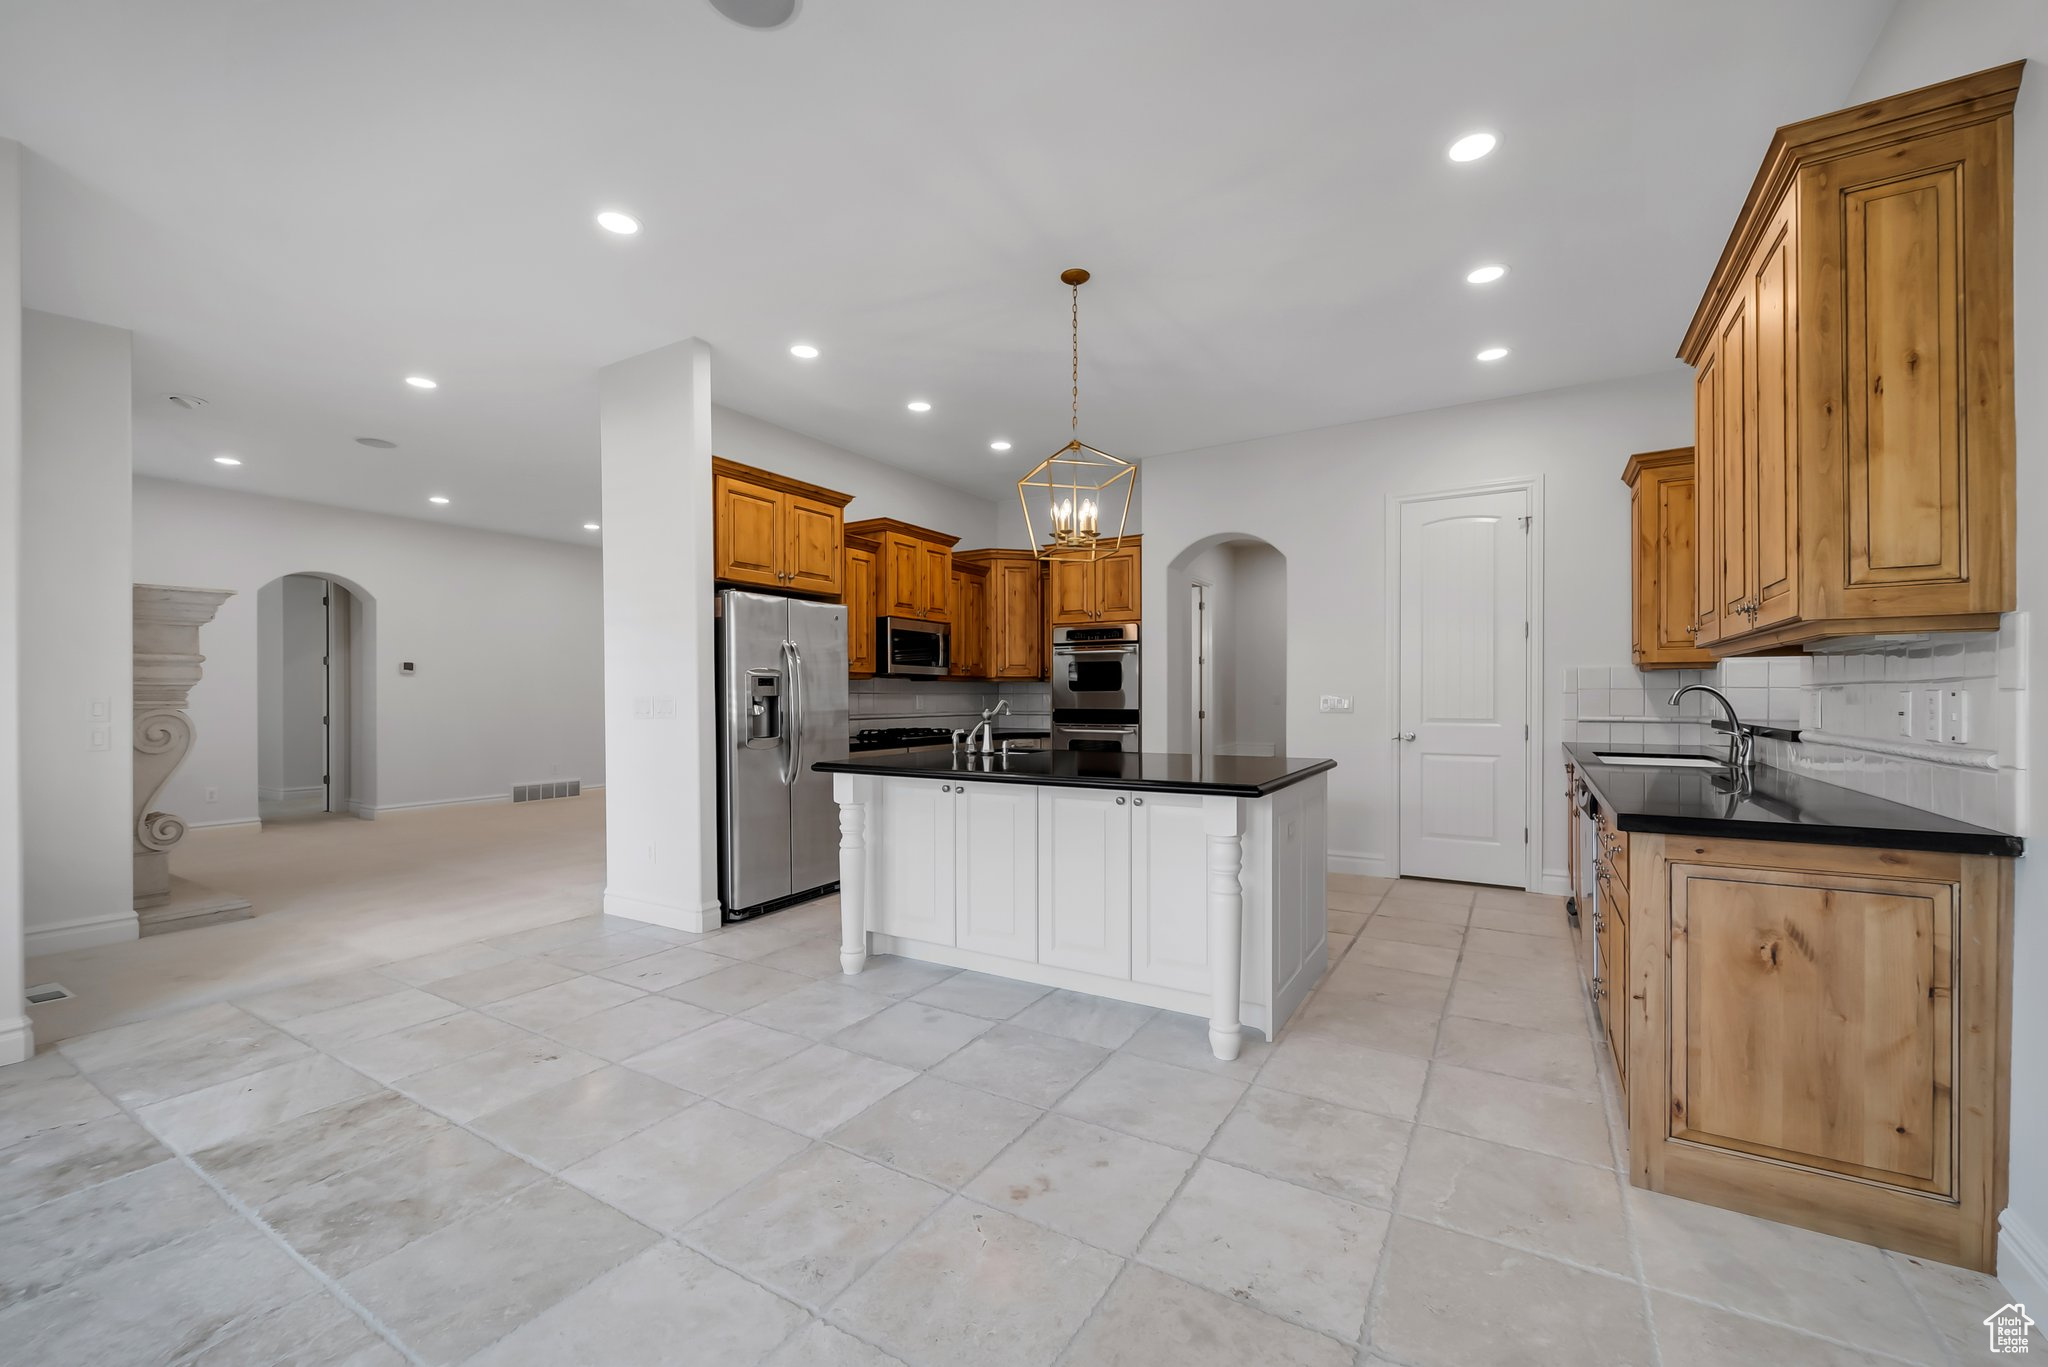 Kitchen with backsplash, stainless steel appliances, a center island with sink, sink, and light tile floors